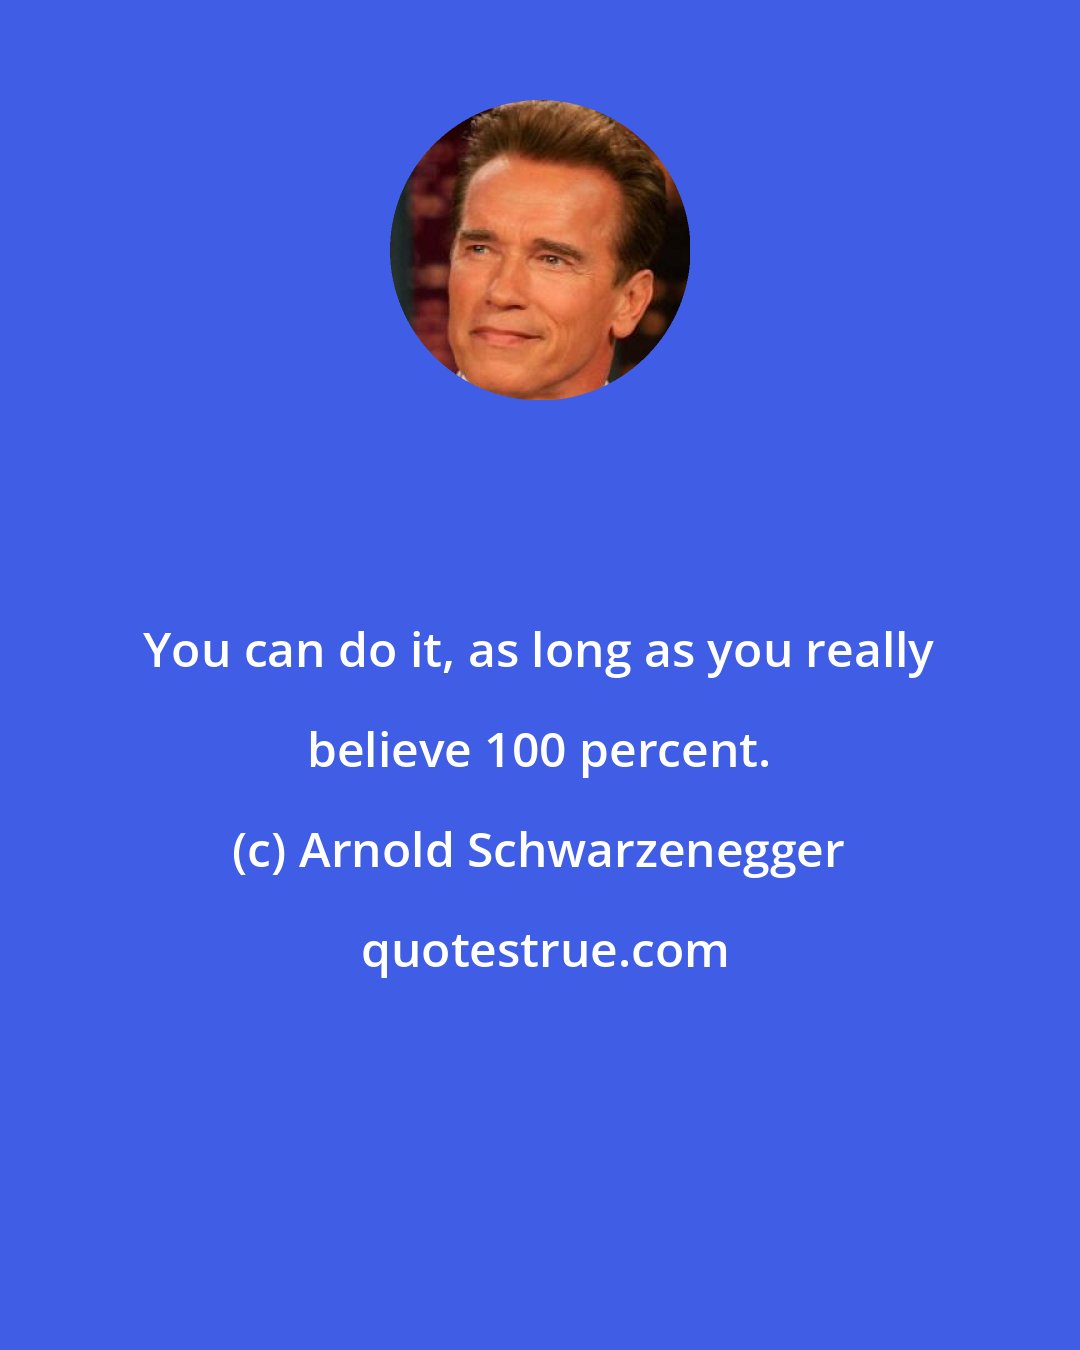 Arnold Schwarzenegger: You can do it, as long as you really believe 100 percent.